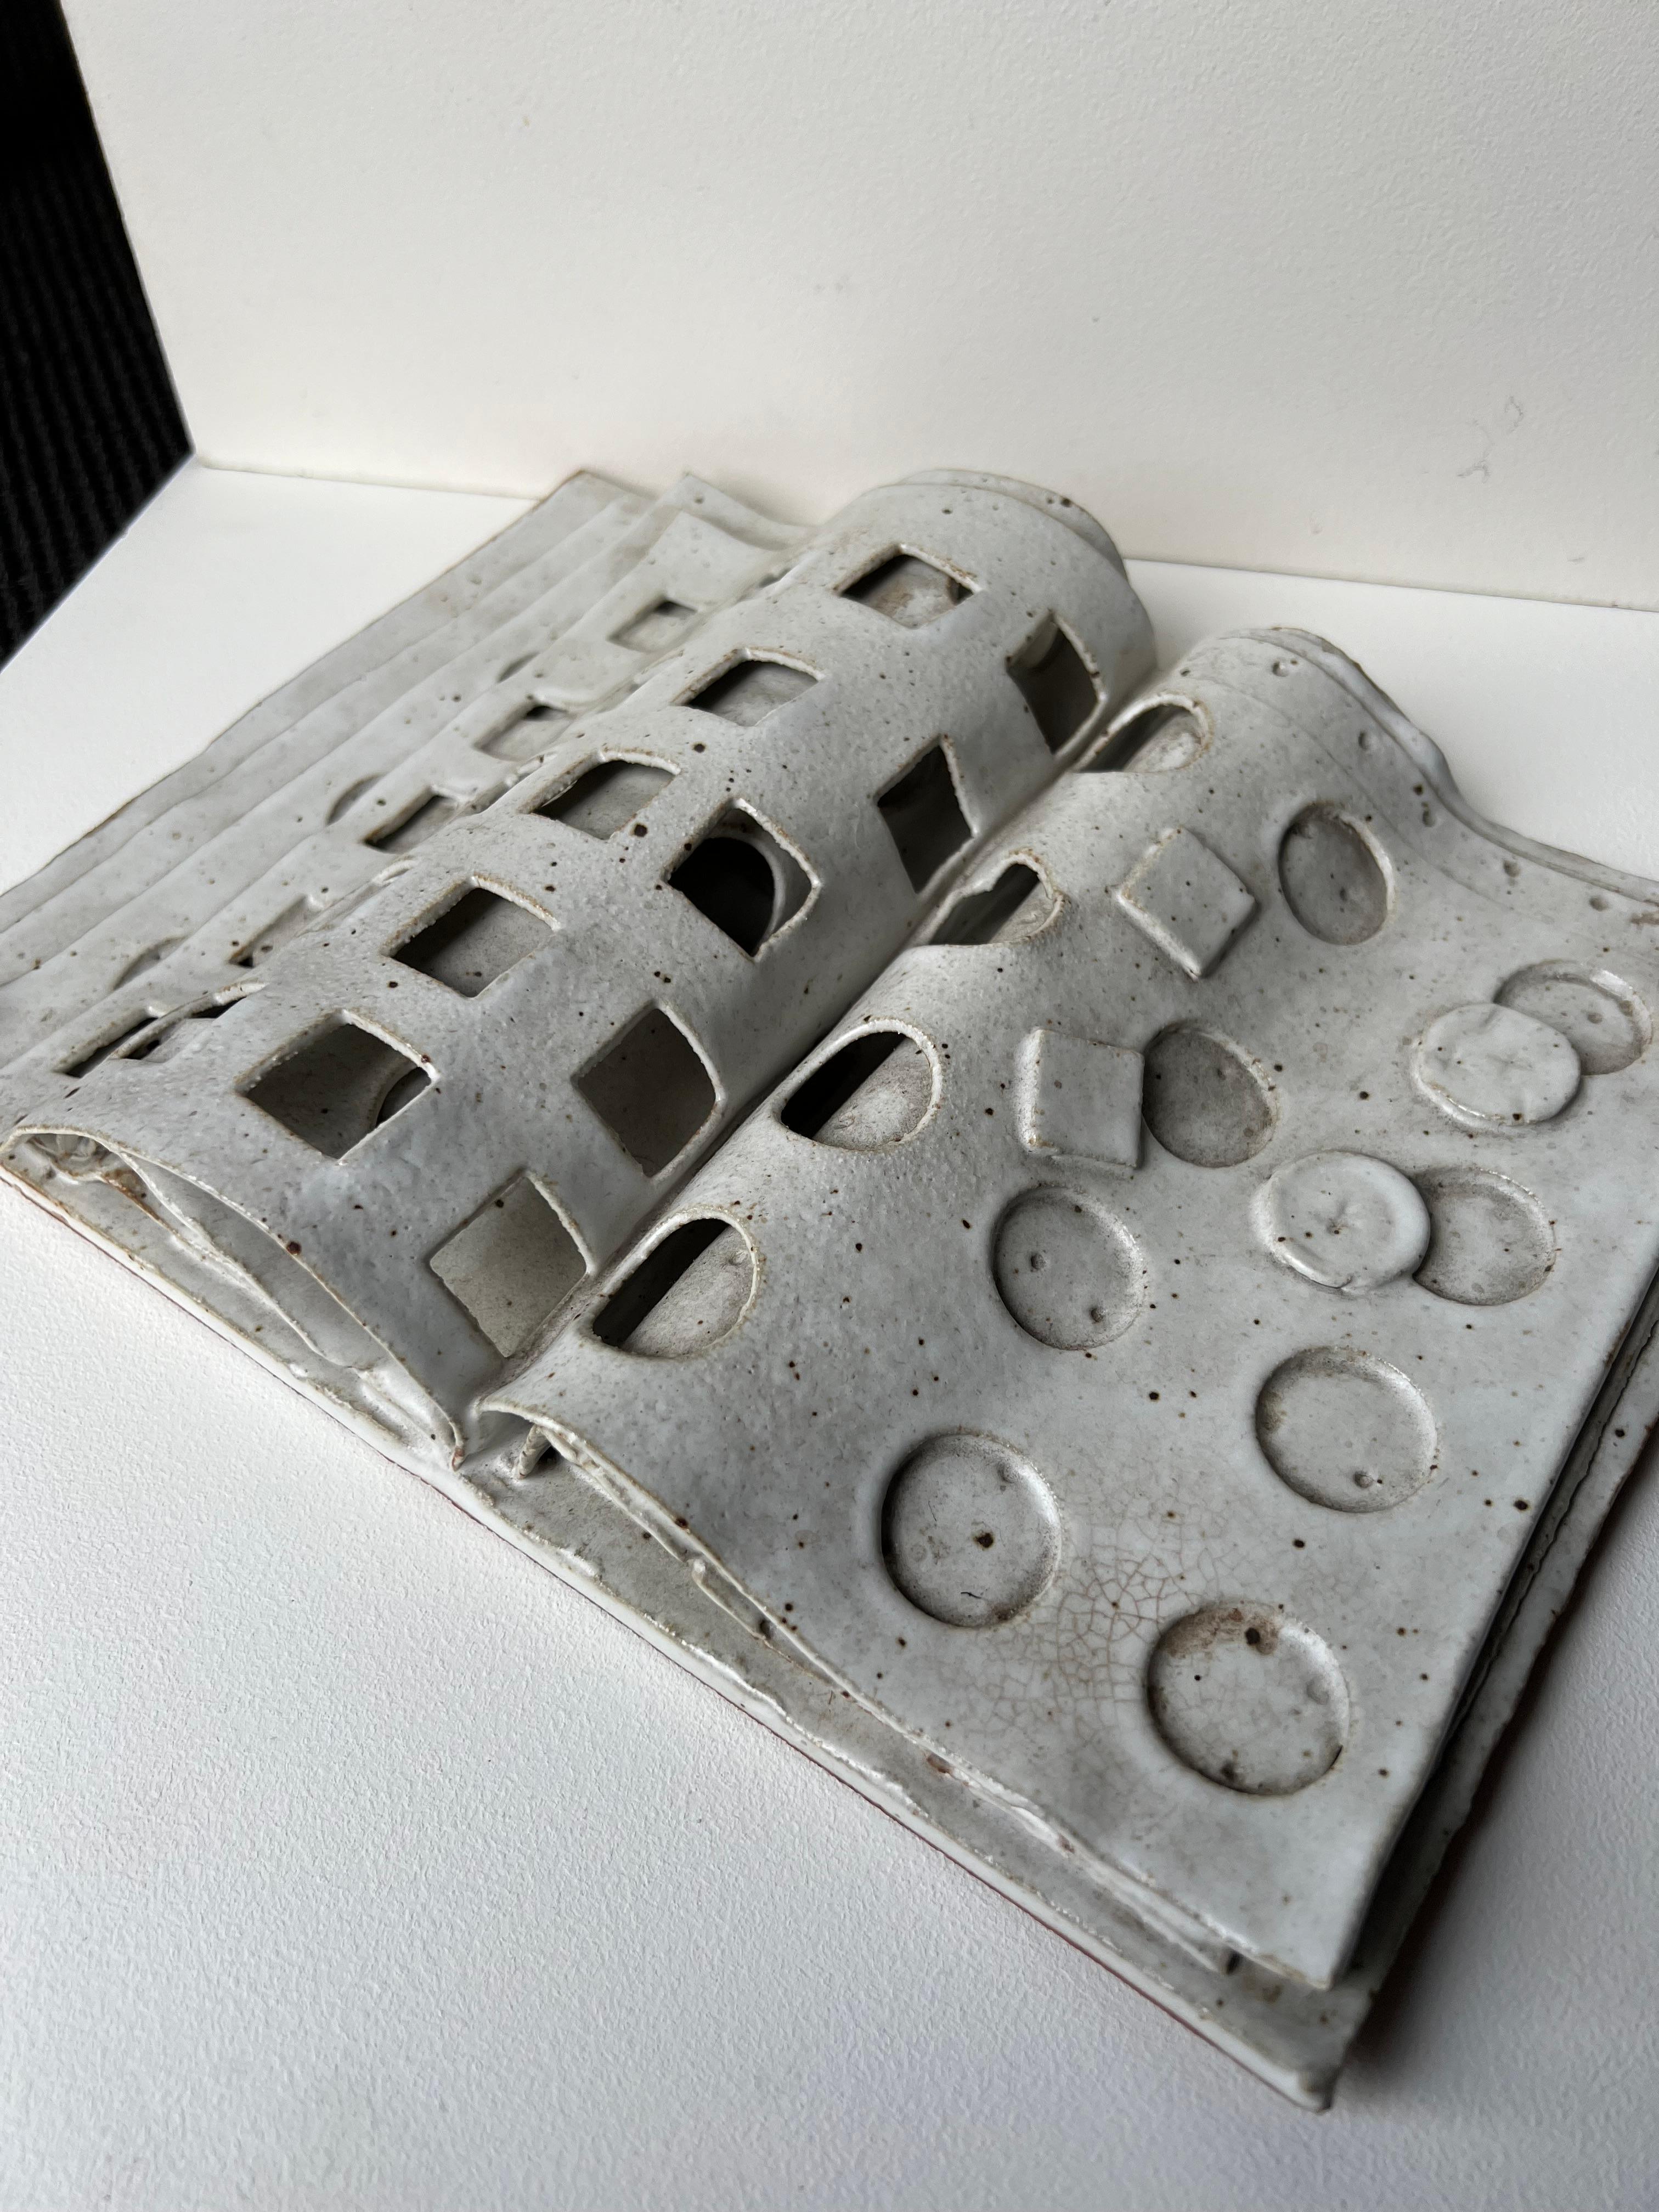 Incredibly unique ceramic artwork by celebrated artist David Korty. Piece is fully ceramic and in the shape/form of a book with multiple square and round cutouts along the pages. Detail of lifted pages also incorporated into the piece to capture